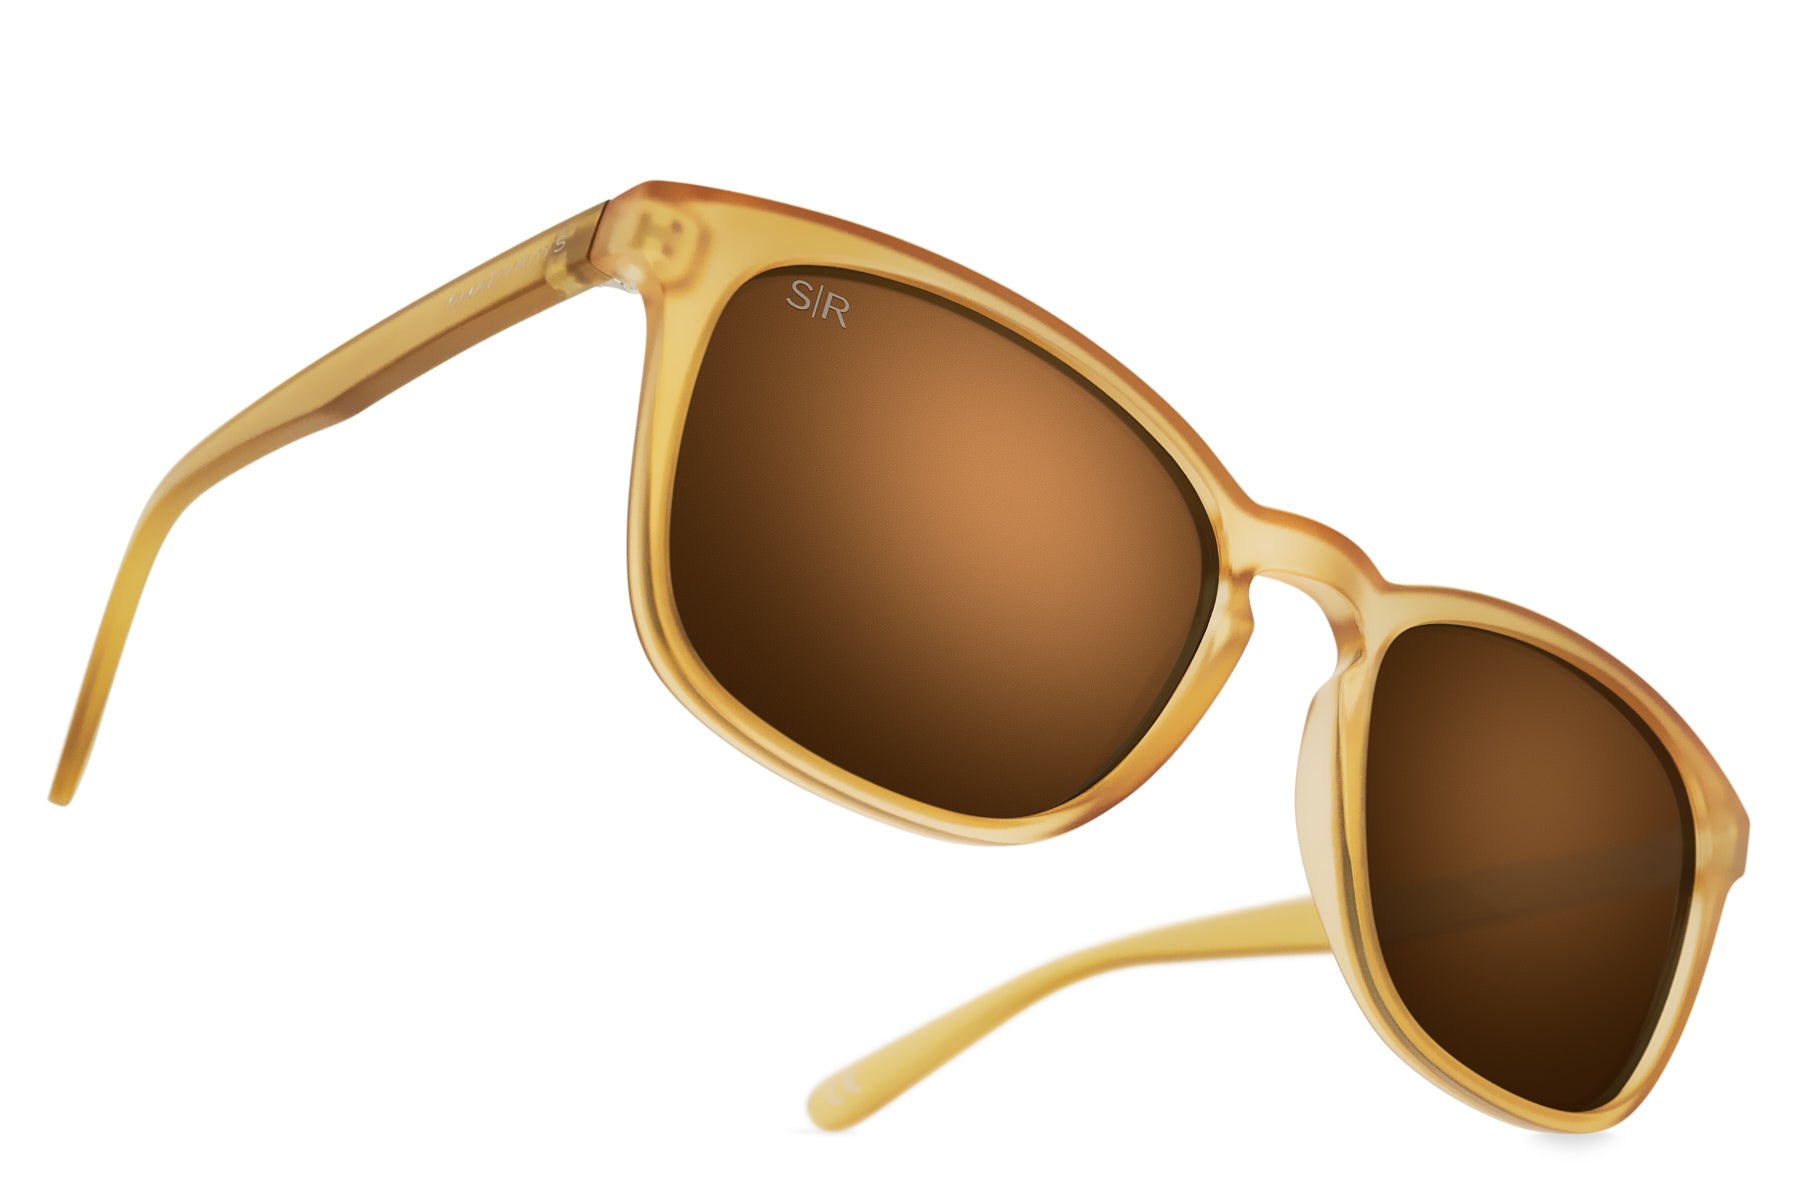 Cypress - Sandstone Polarized Sunglasses | Sunglasses | Best Christmas Gifts | Gifts for the Holidays | Unique Gifts for Friends| Shady Rays